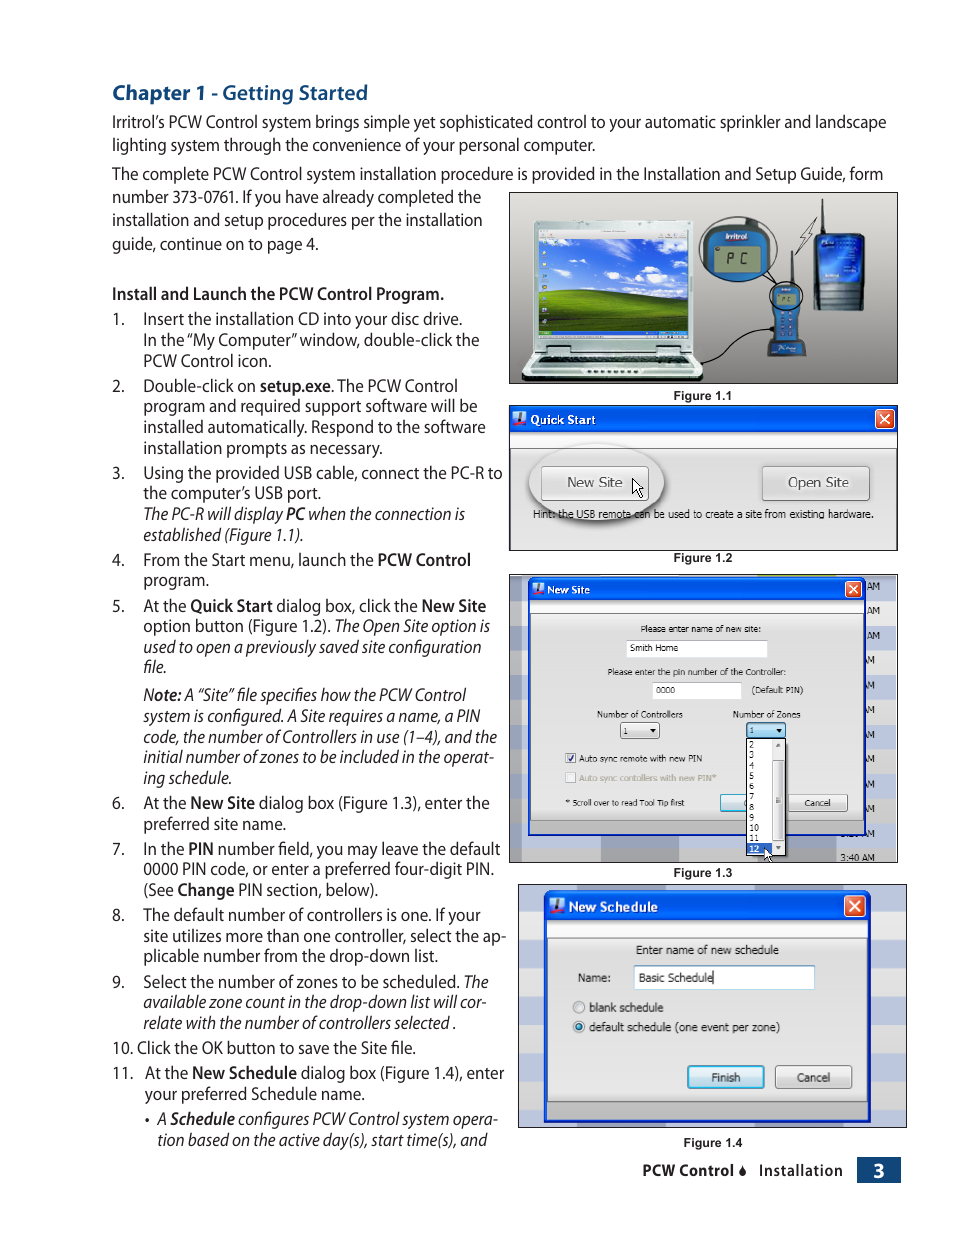 3chapter 1 - getting started | Irritrol PCW Control User Manual | Page 5 / 33